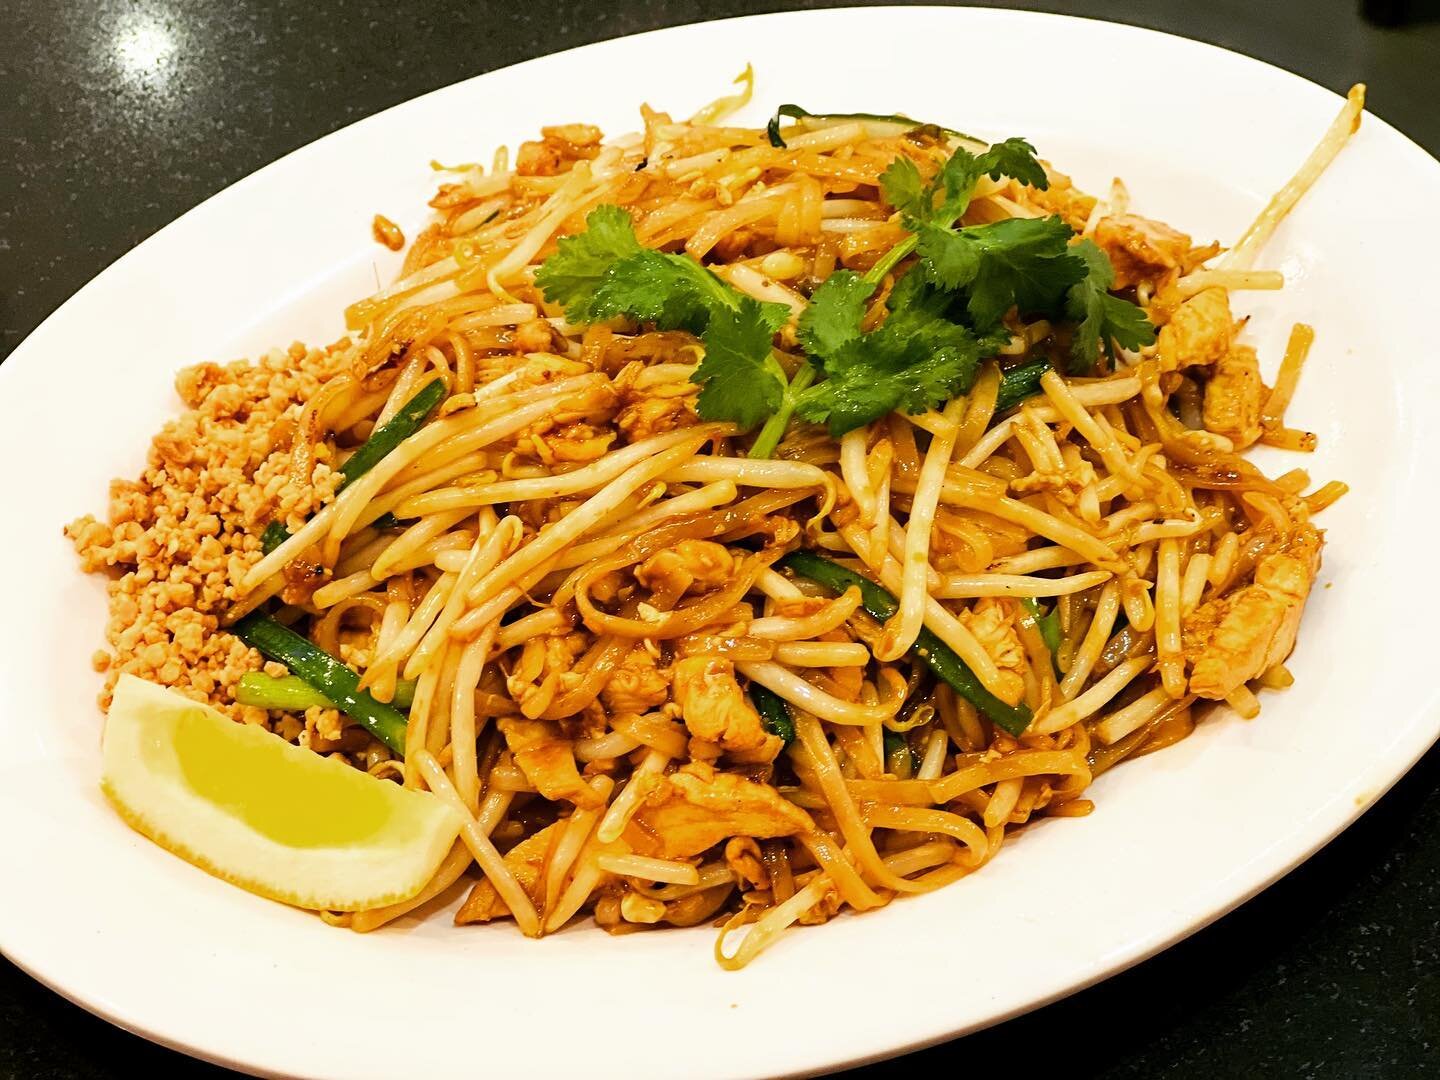 ☀️The sun is out &amp;  it's FRIDAY!☀️
Celebrate the sunshine with a taste of our own interpretation of Pad Thai. 
Yes, we're famous for Malaysian food but we have a lot of iconic SE Asian dishes. Our Pad Thai is a classic favourite. 
Order on #deliv